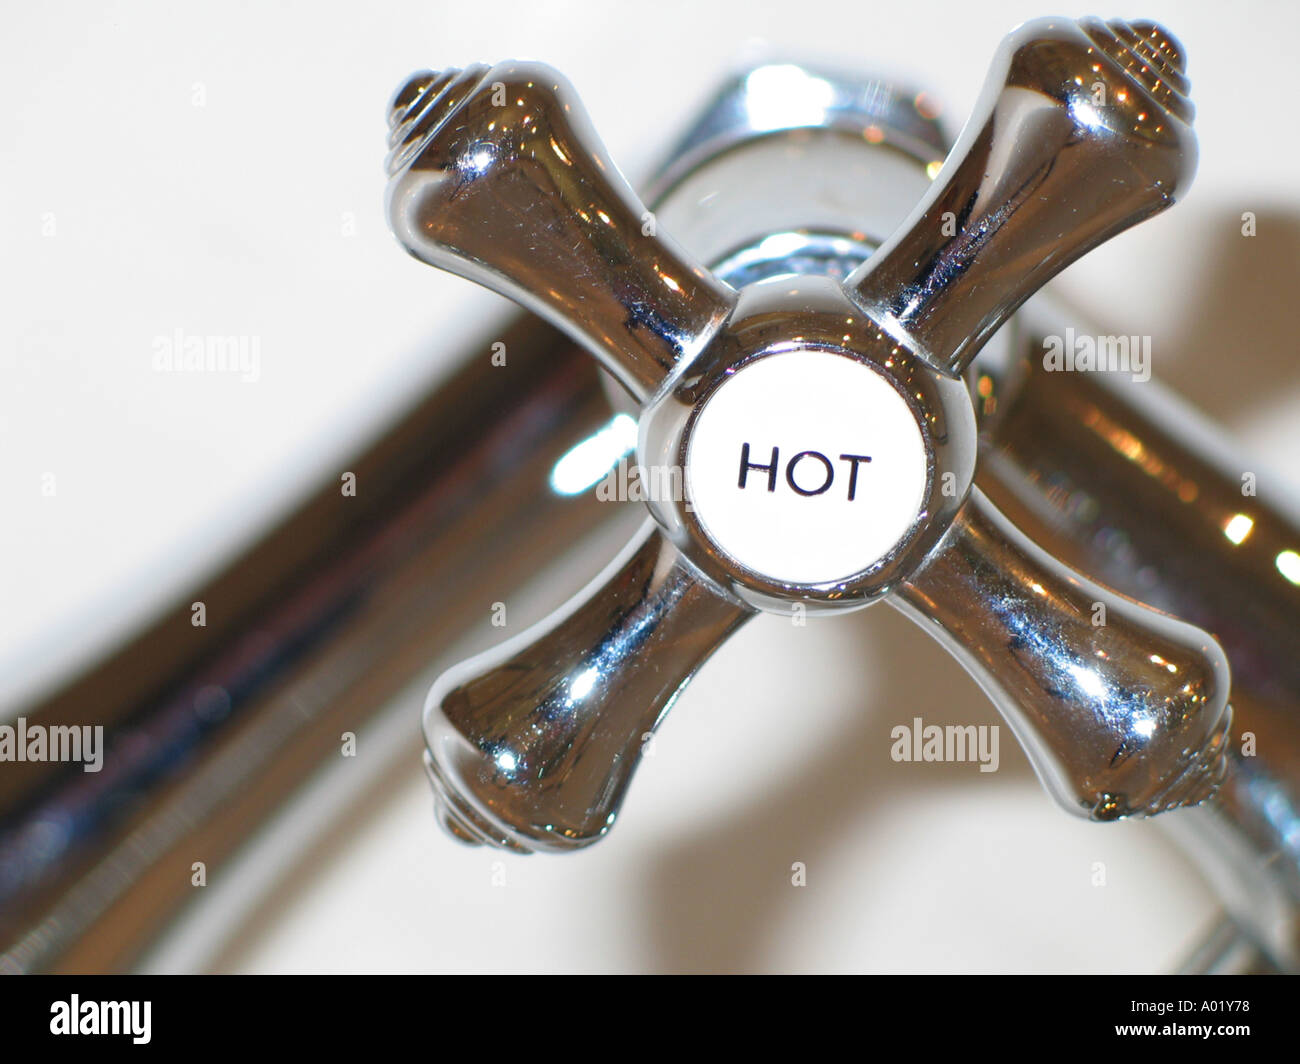 A BATHROOM HOT TAP PIC BY JOHN ROBERTSON Stock Photo